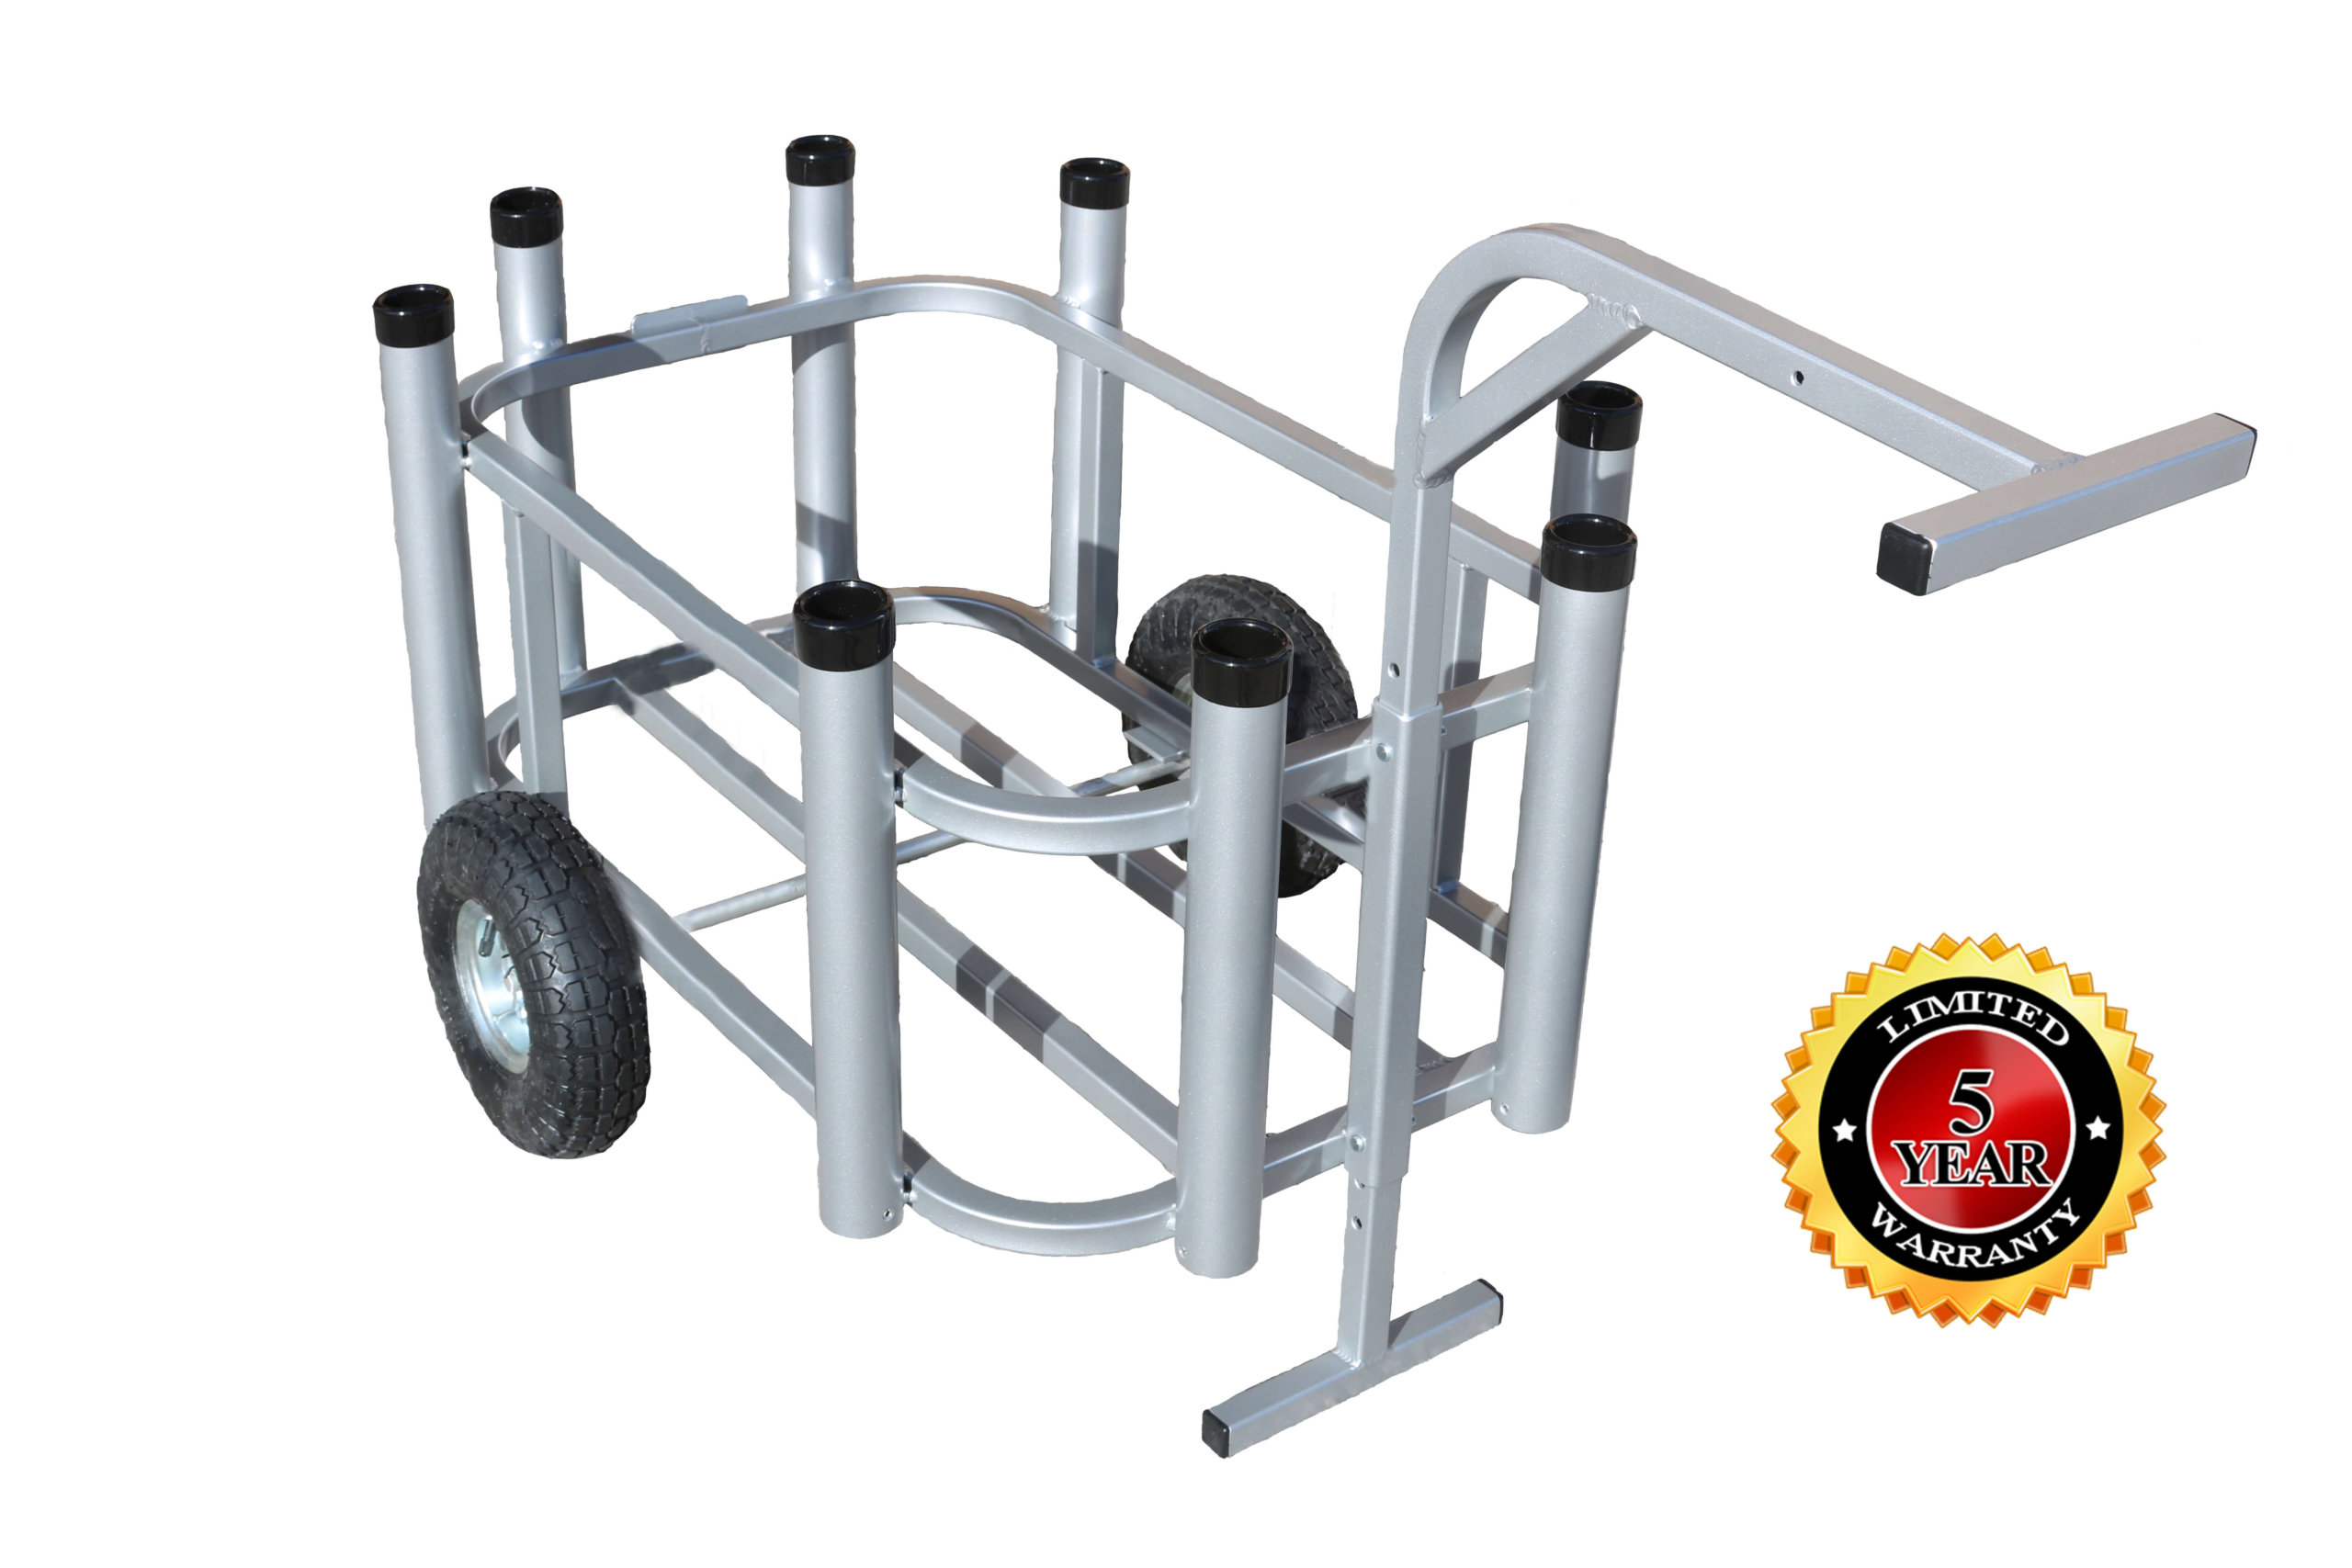 Plattinum Products - The MacDaddy of beach carts! This cart boasts 16 total  tubes, boogie board holders, cutting board and 49cm Wheeleez wheels! You  want custom? Give us a call, 321.637.0222 #FishingFriday